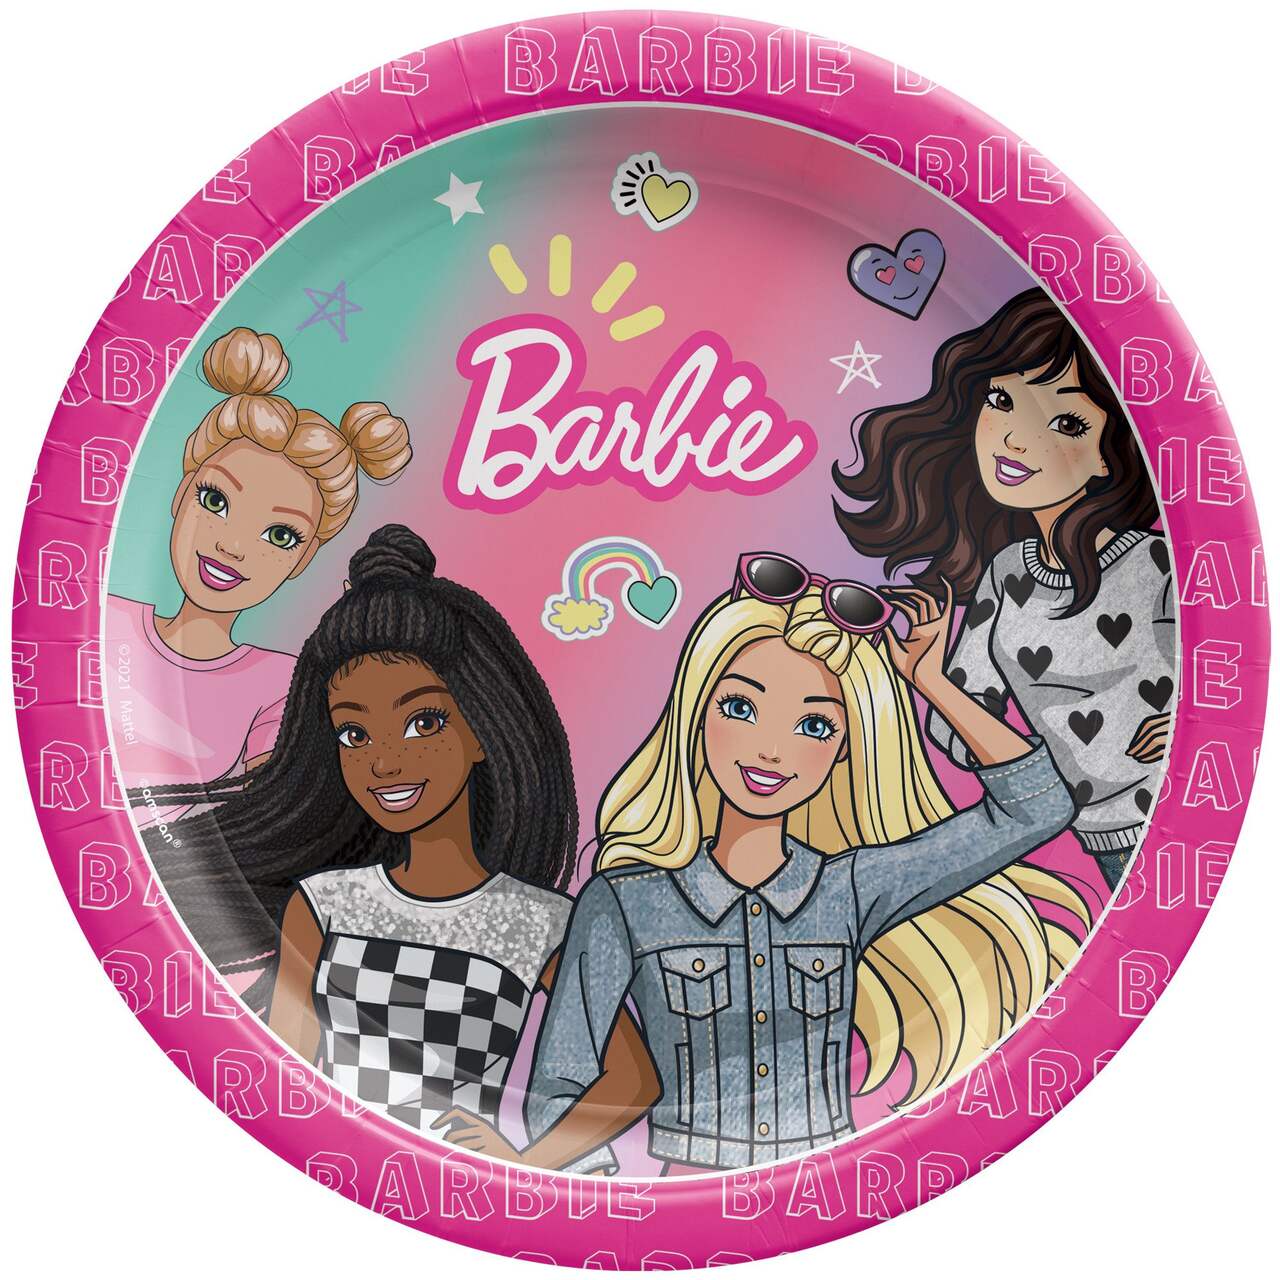 Barbie Cake Topper, Party Supplies